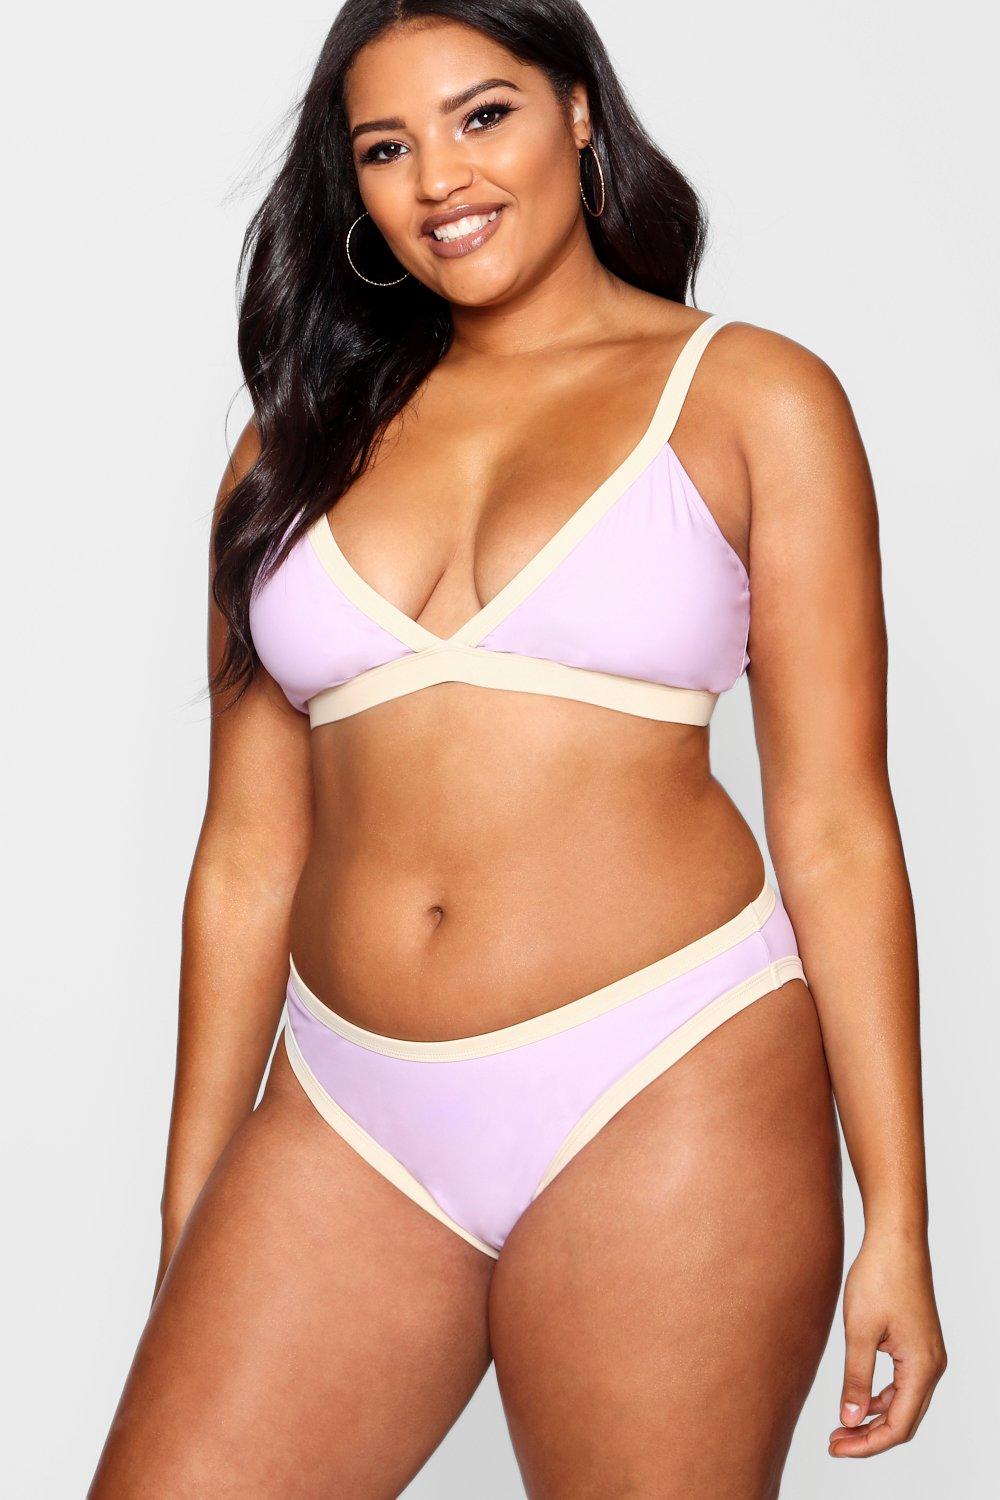 UK Retailer Boohoo.com Uploads Un-Retouched Photos of Models With Stretch Marks
